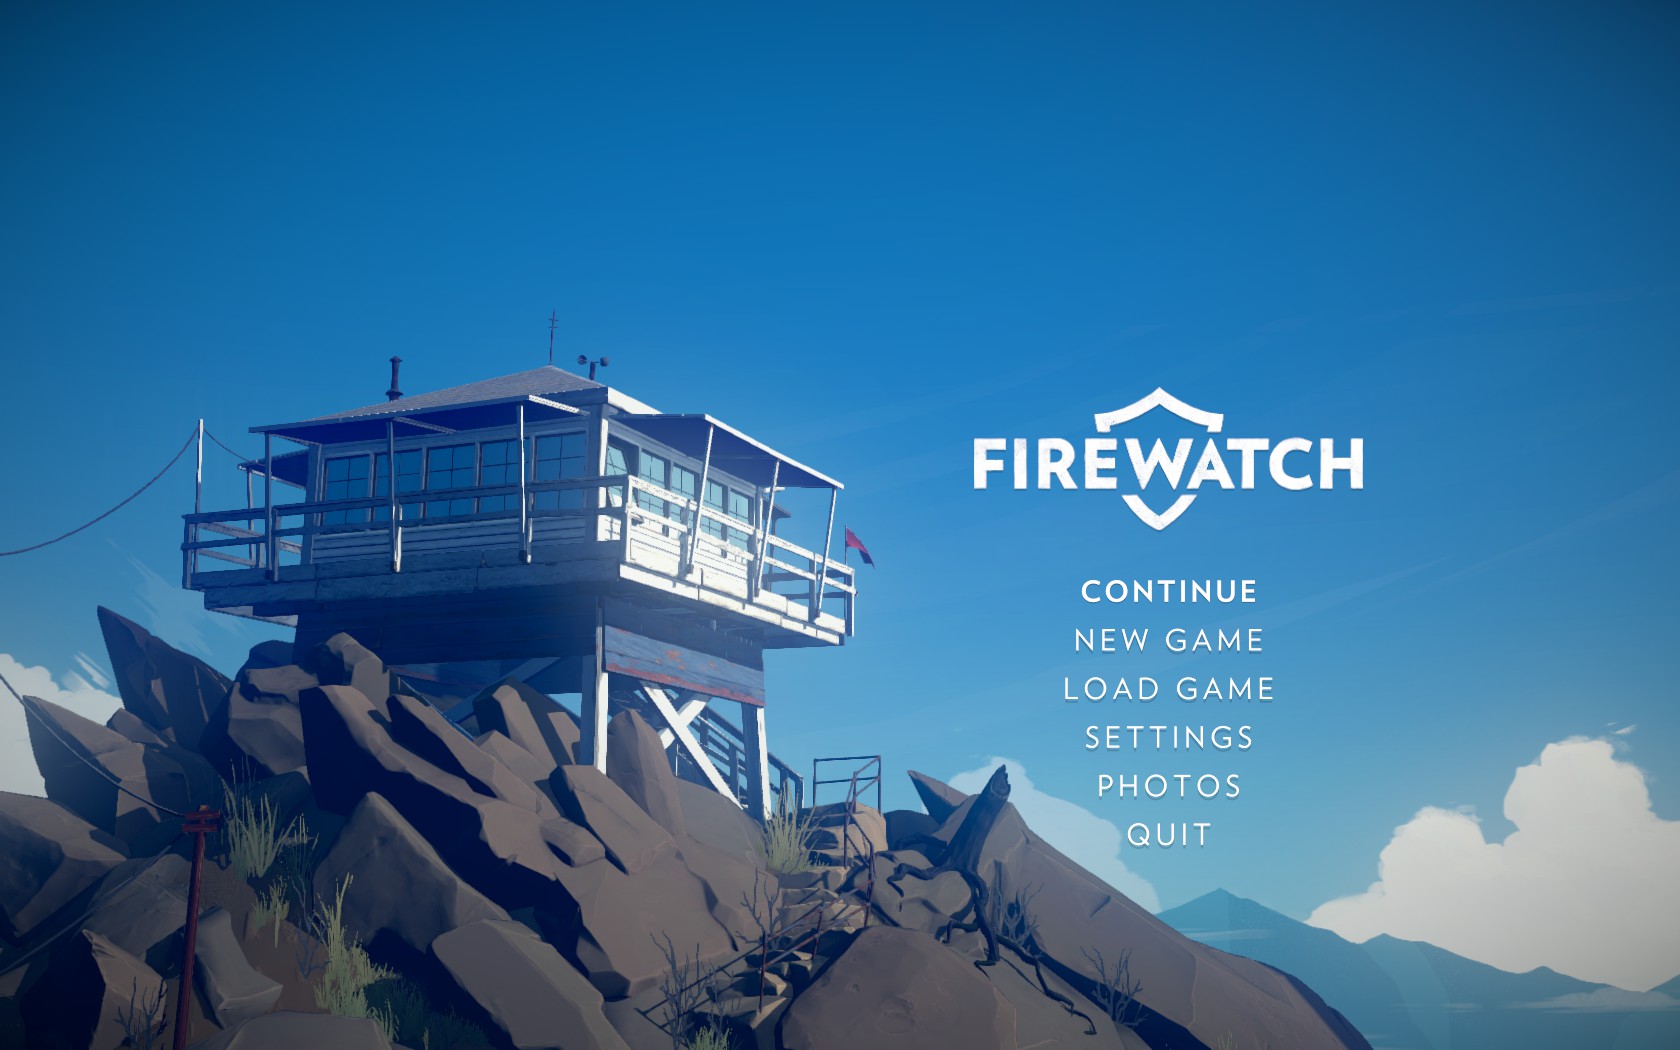 Firewatch - More of a... Controlled Burn